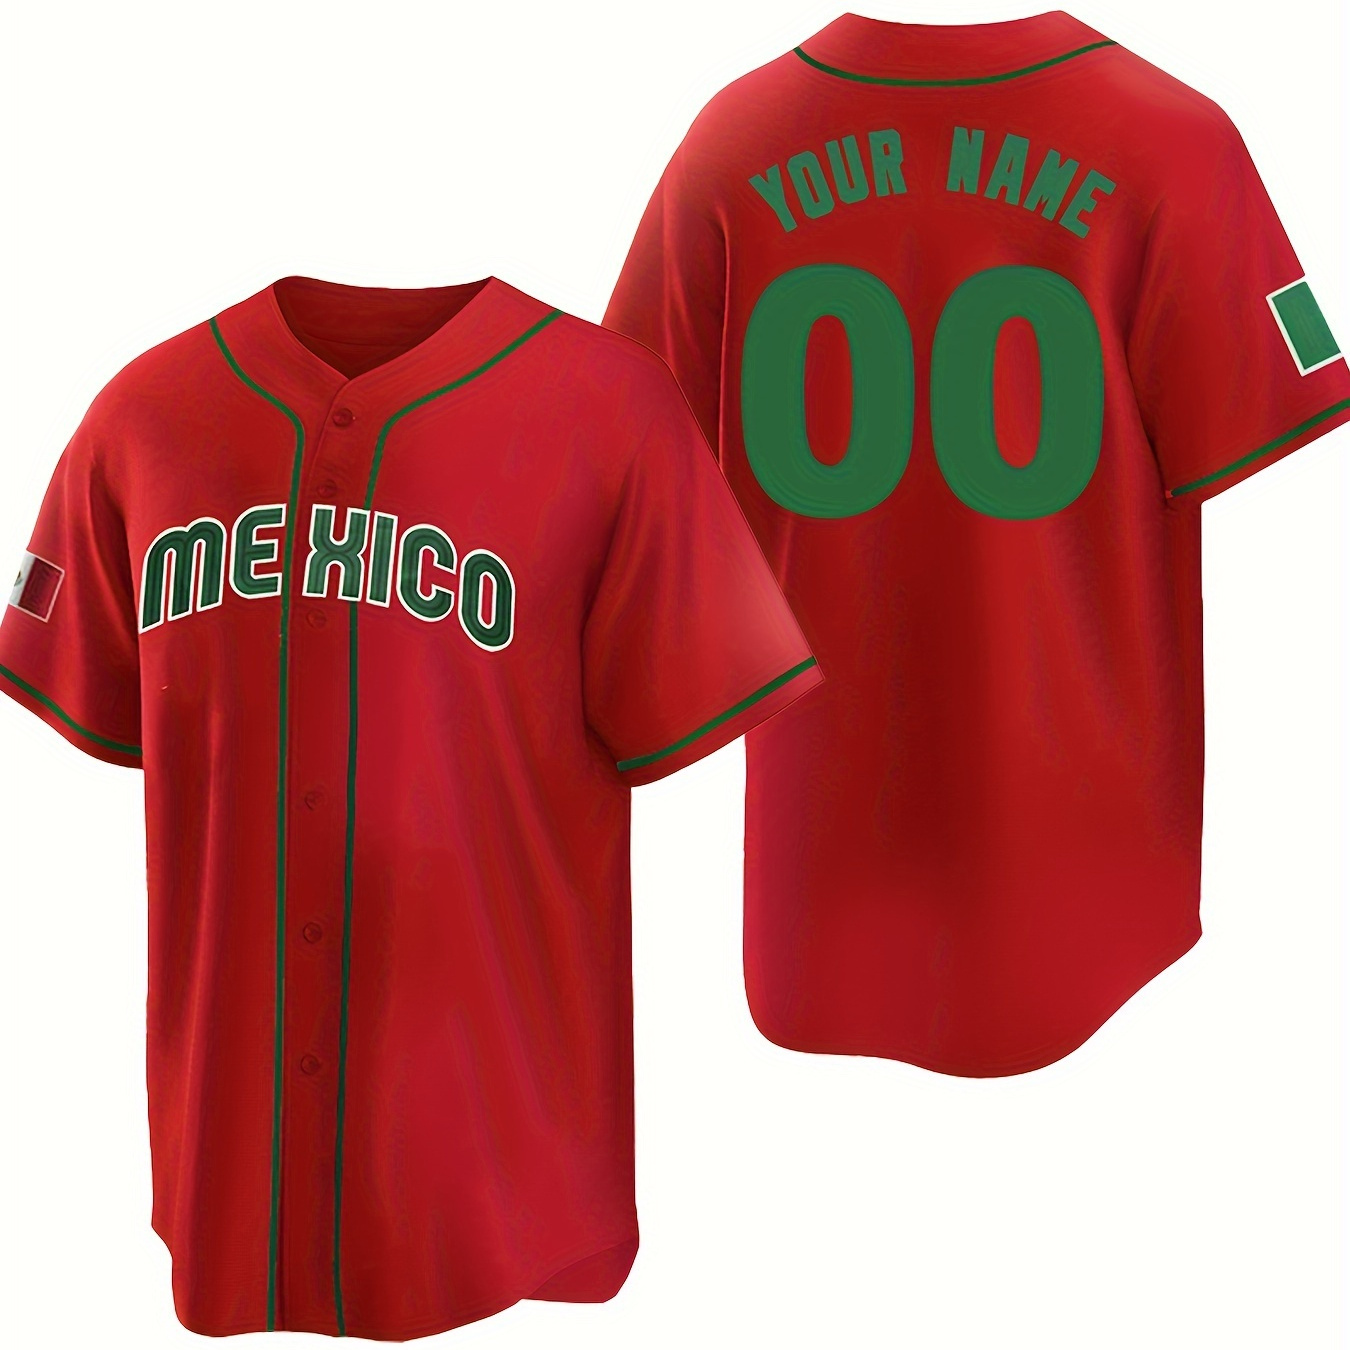 

Men's Personalized Custom Baseball Jersey Shirt, Customizable Name & Numbers Mexico Print Short Sleeve Shirt For Training Party Competition